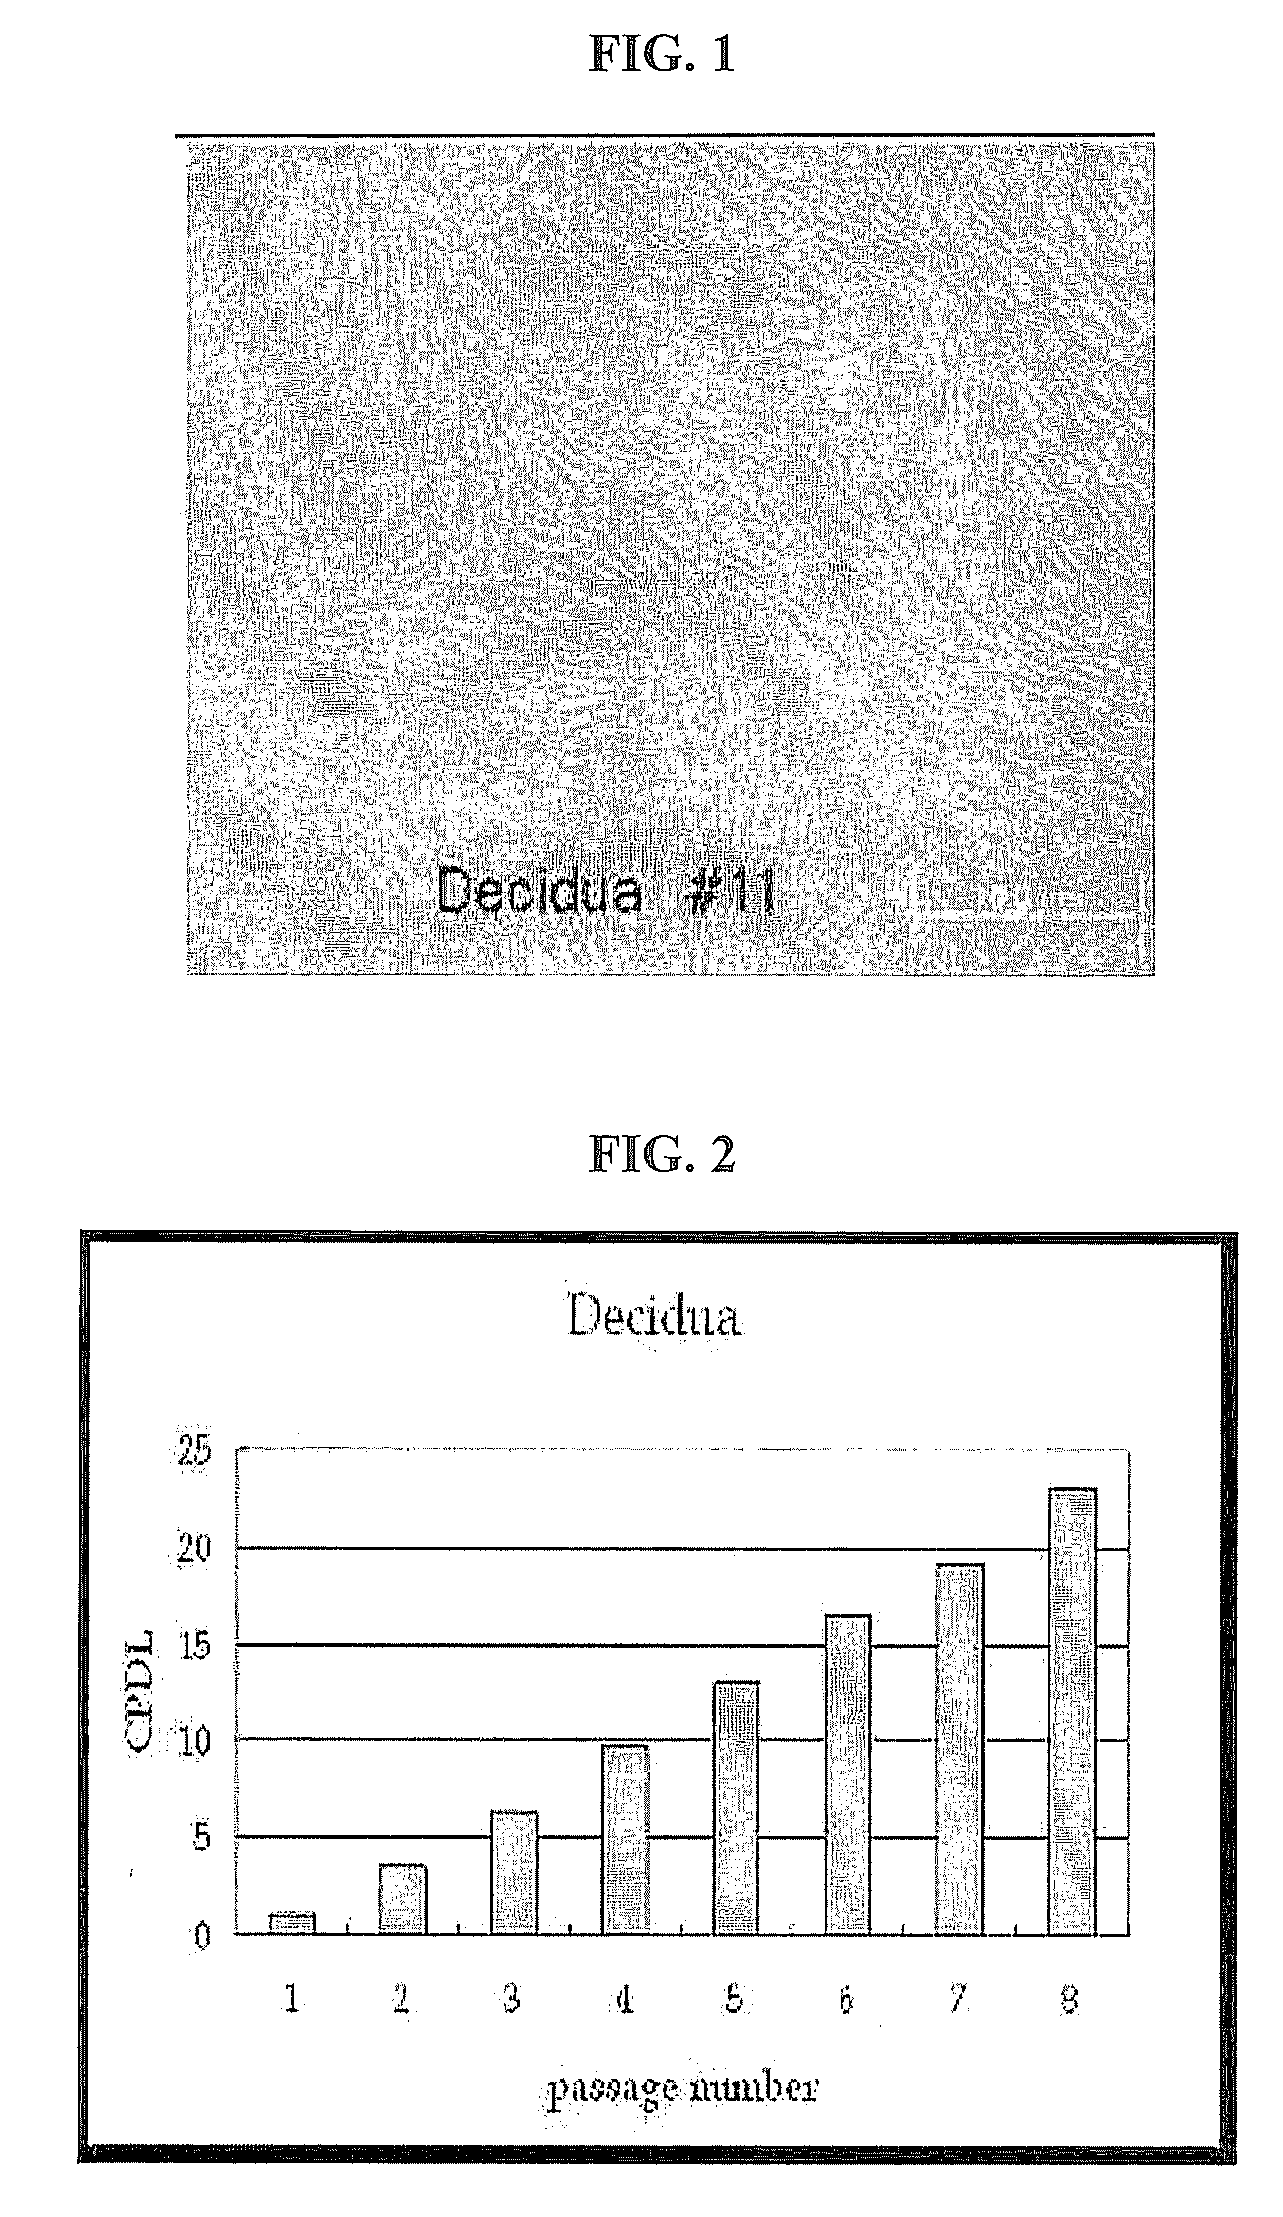 Cellular therapeutic agent for incontinence or urine comprising stem cells originated from decidua or adipose